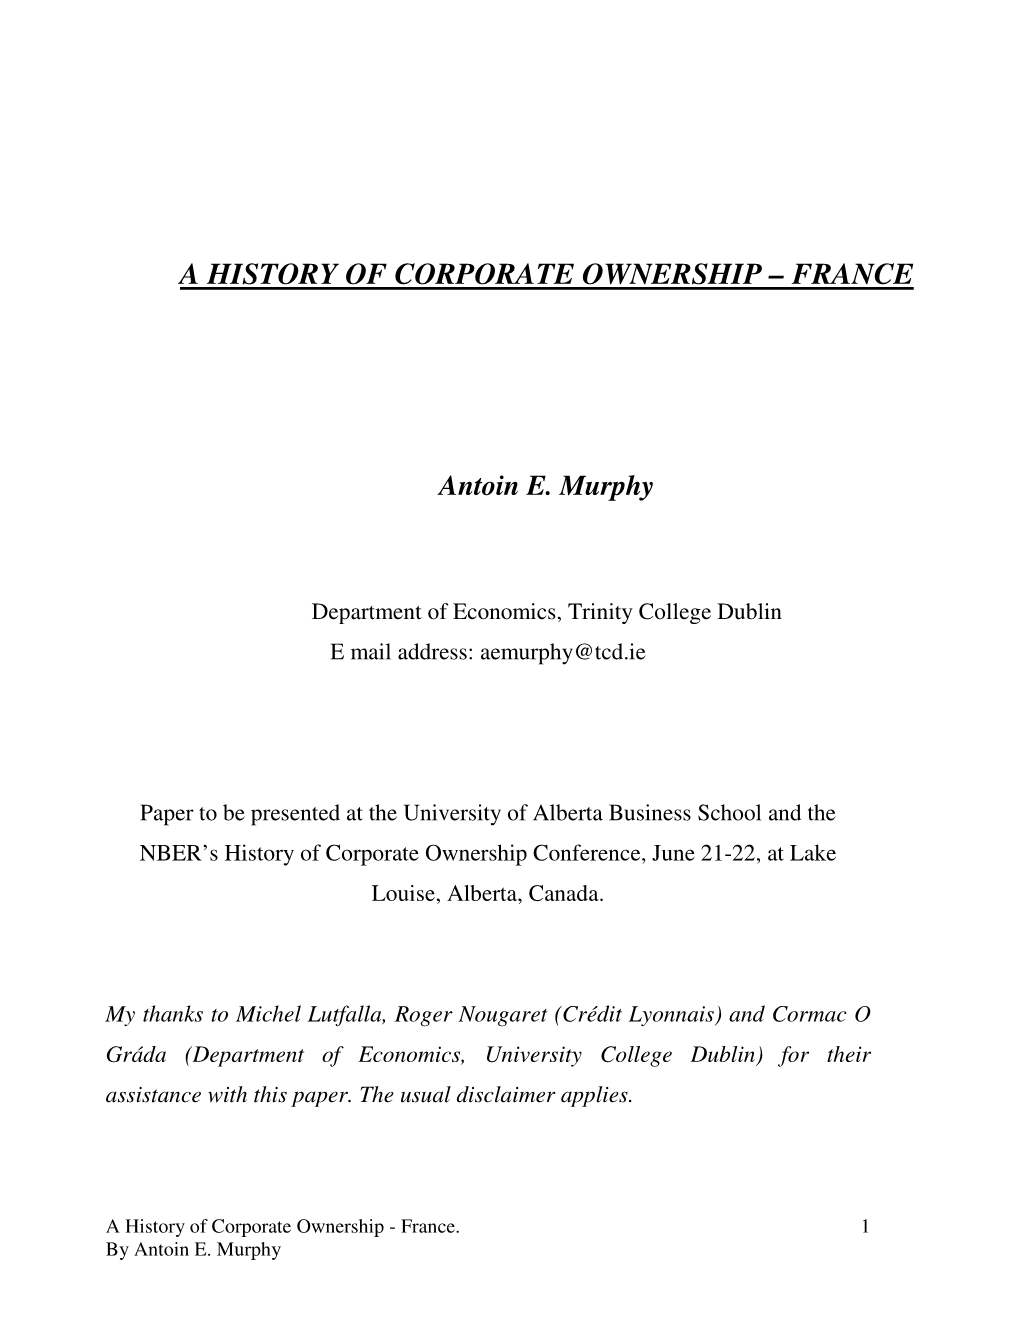 A History of Corporate Ownership – France